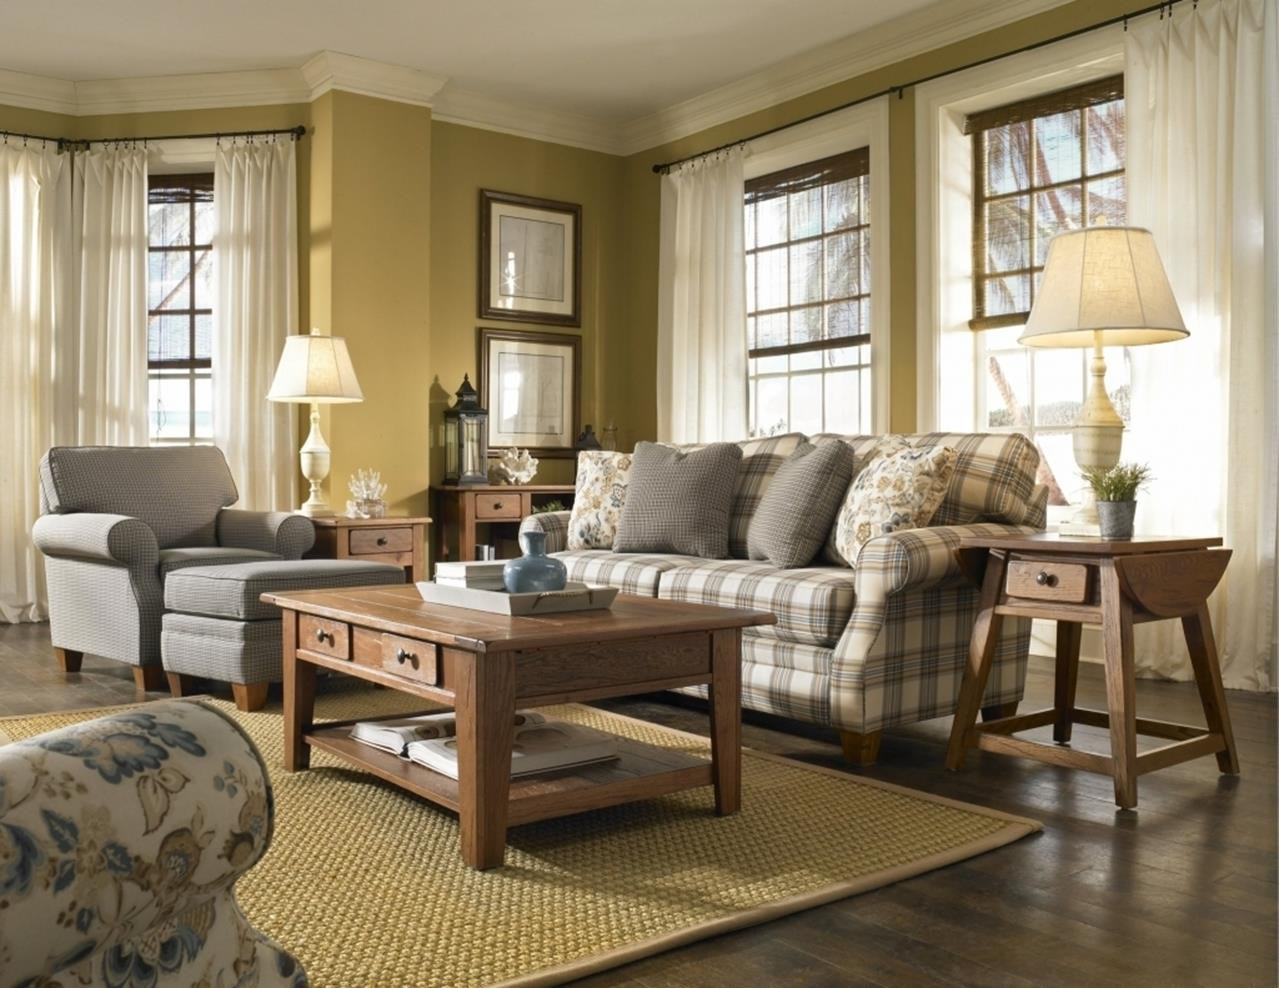 Country Living Room Chairs
 33 Perfect Country Style Living Room Furniture Ideas